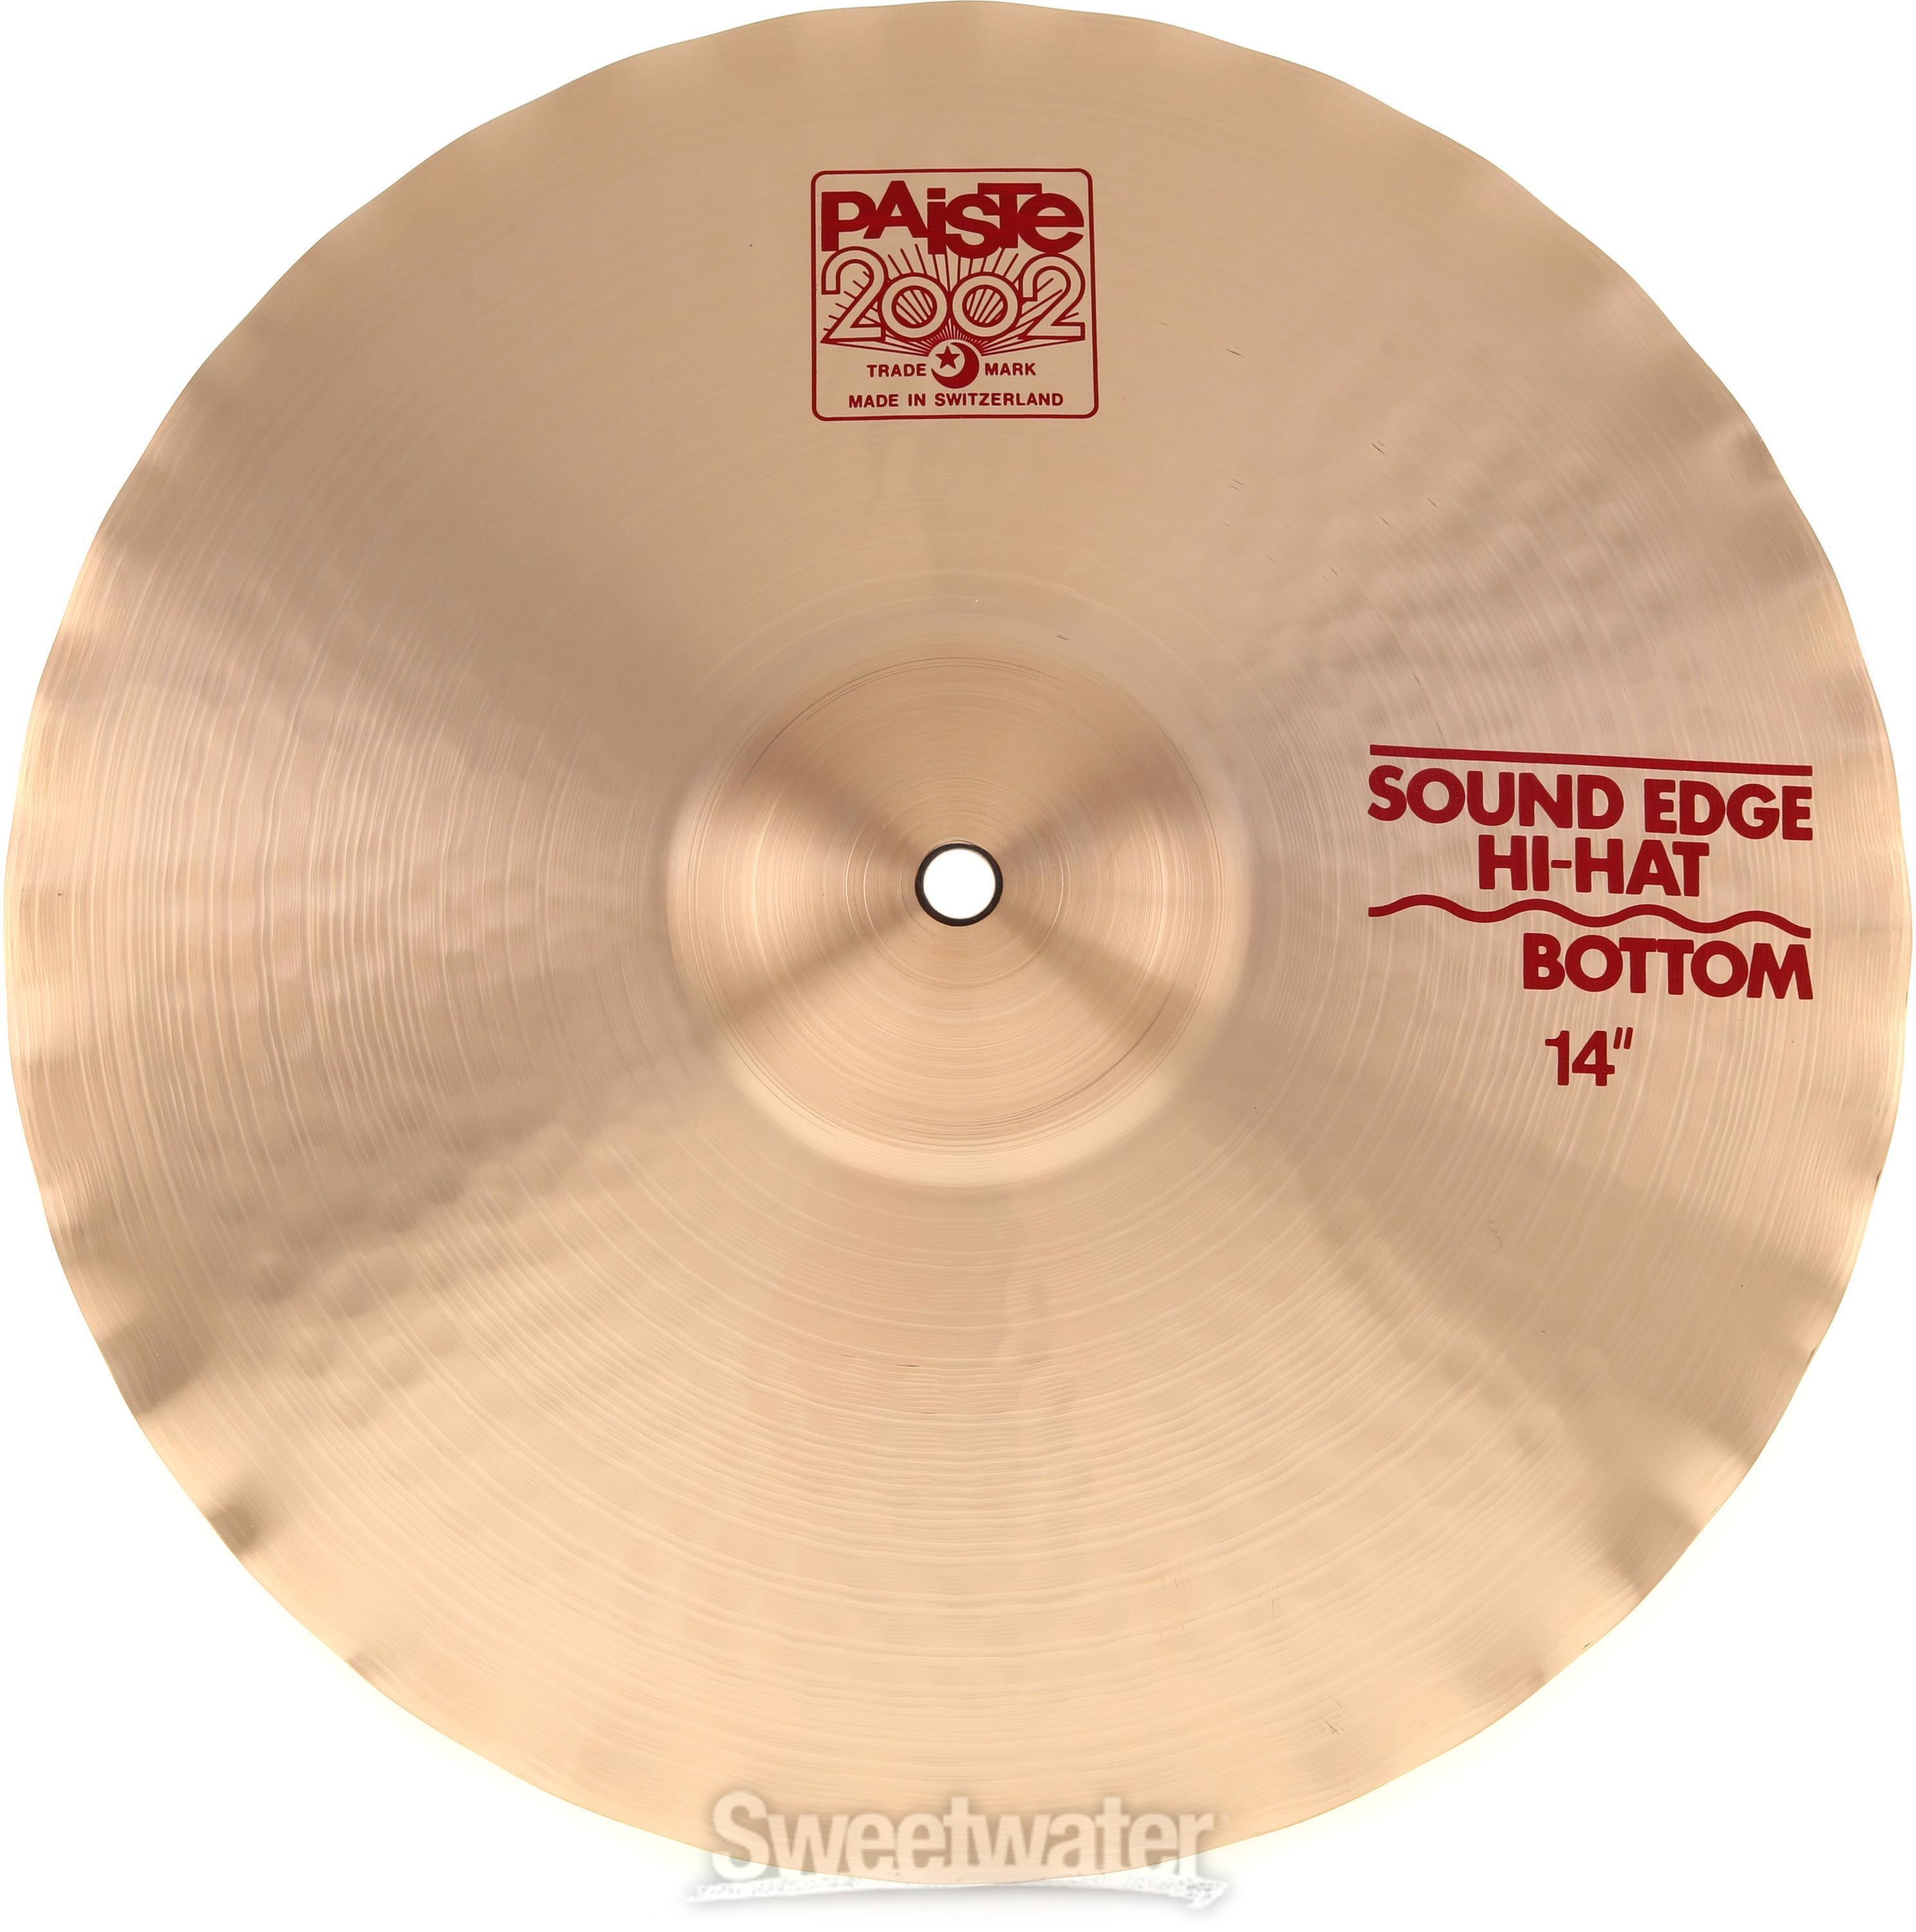 Paiste 14-inch 2002 Sound Edge Hi-hat Cymbals | Sweetwater